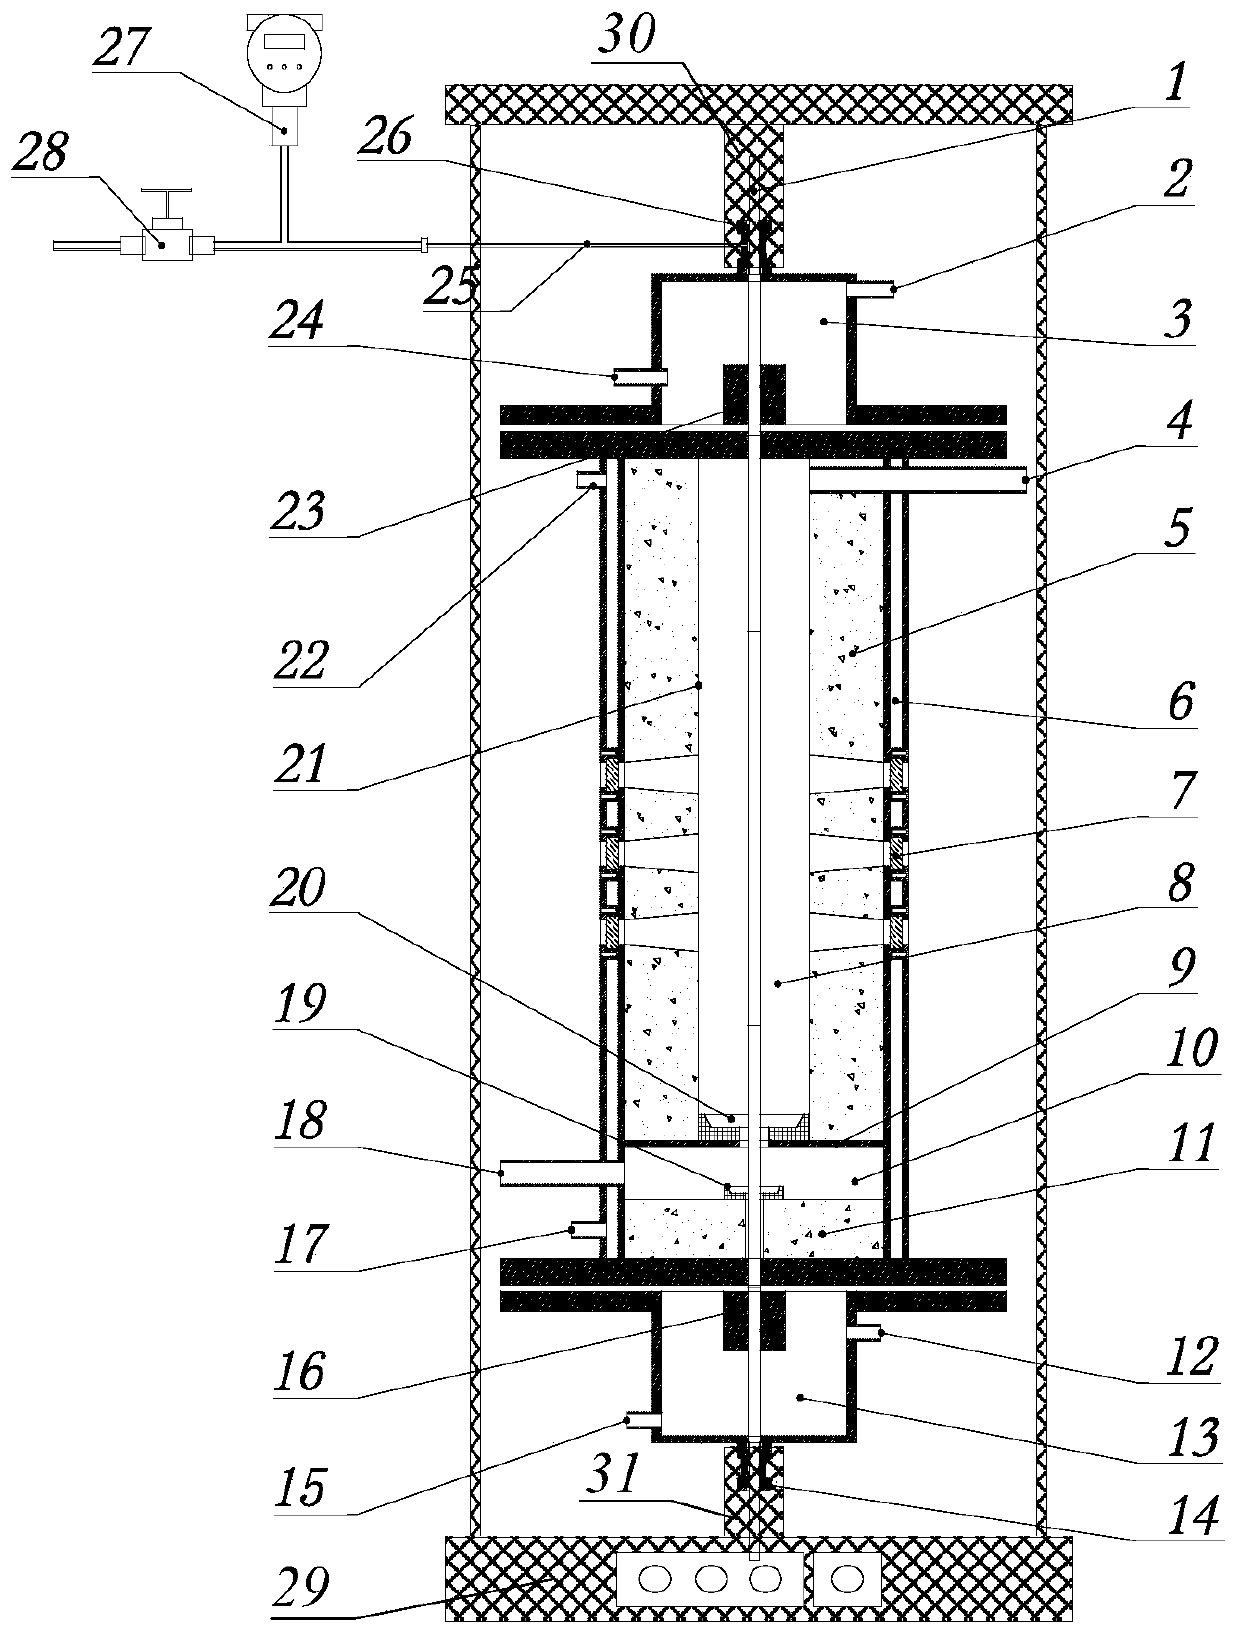 Experimental device and method for studying failure behavior of fuel elements in severe nuclear reactor accidents